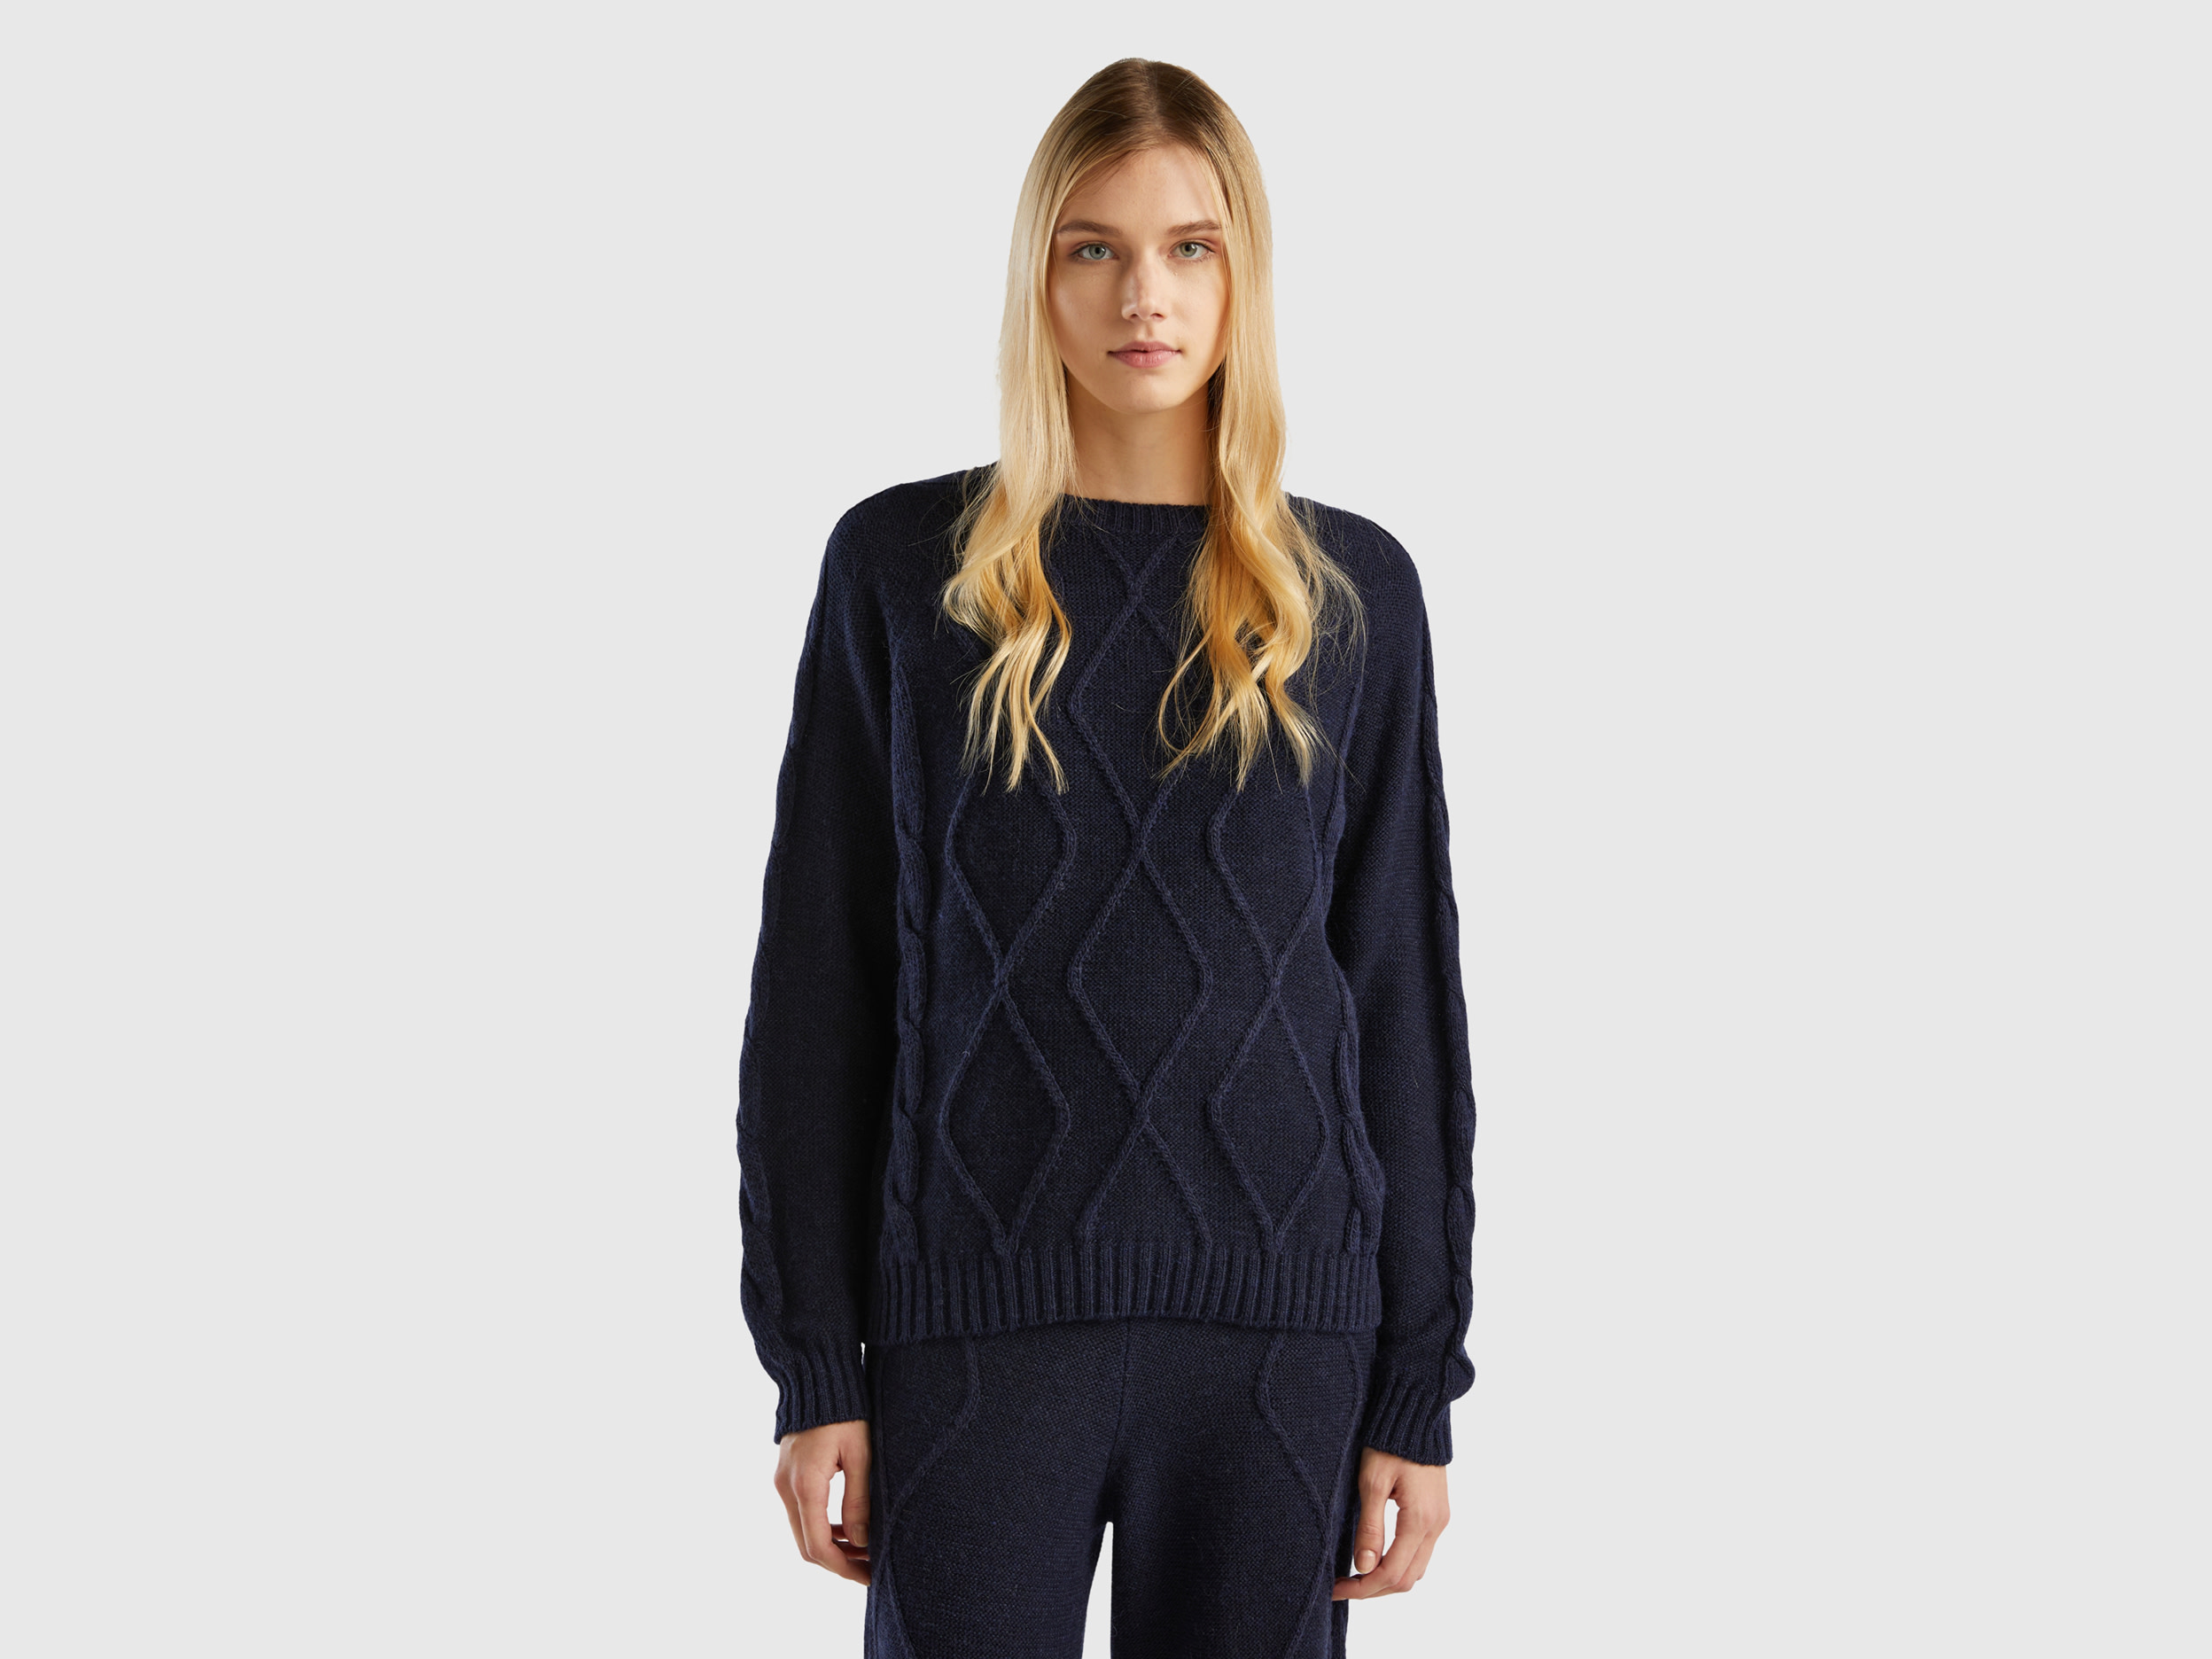 Benetton, Sweater With Cables And Diamonds, size XS, Dark Blue, Women